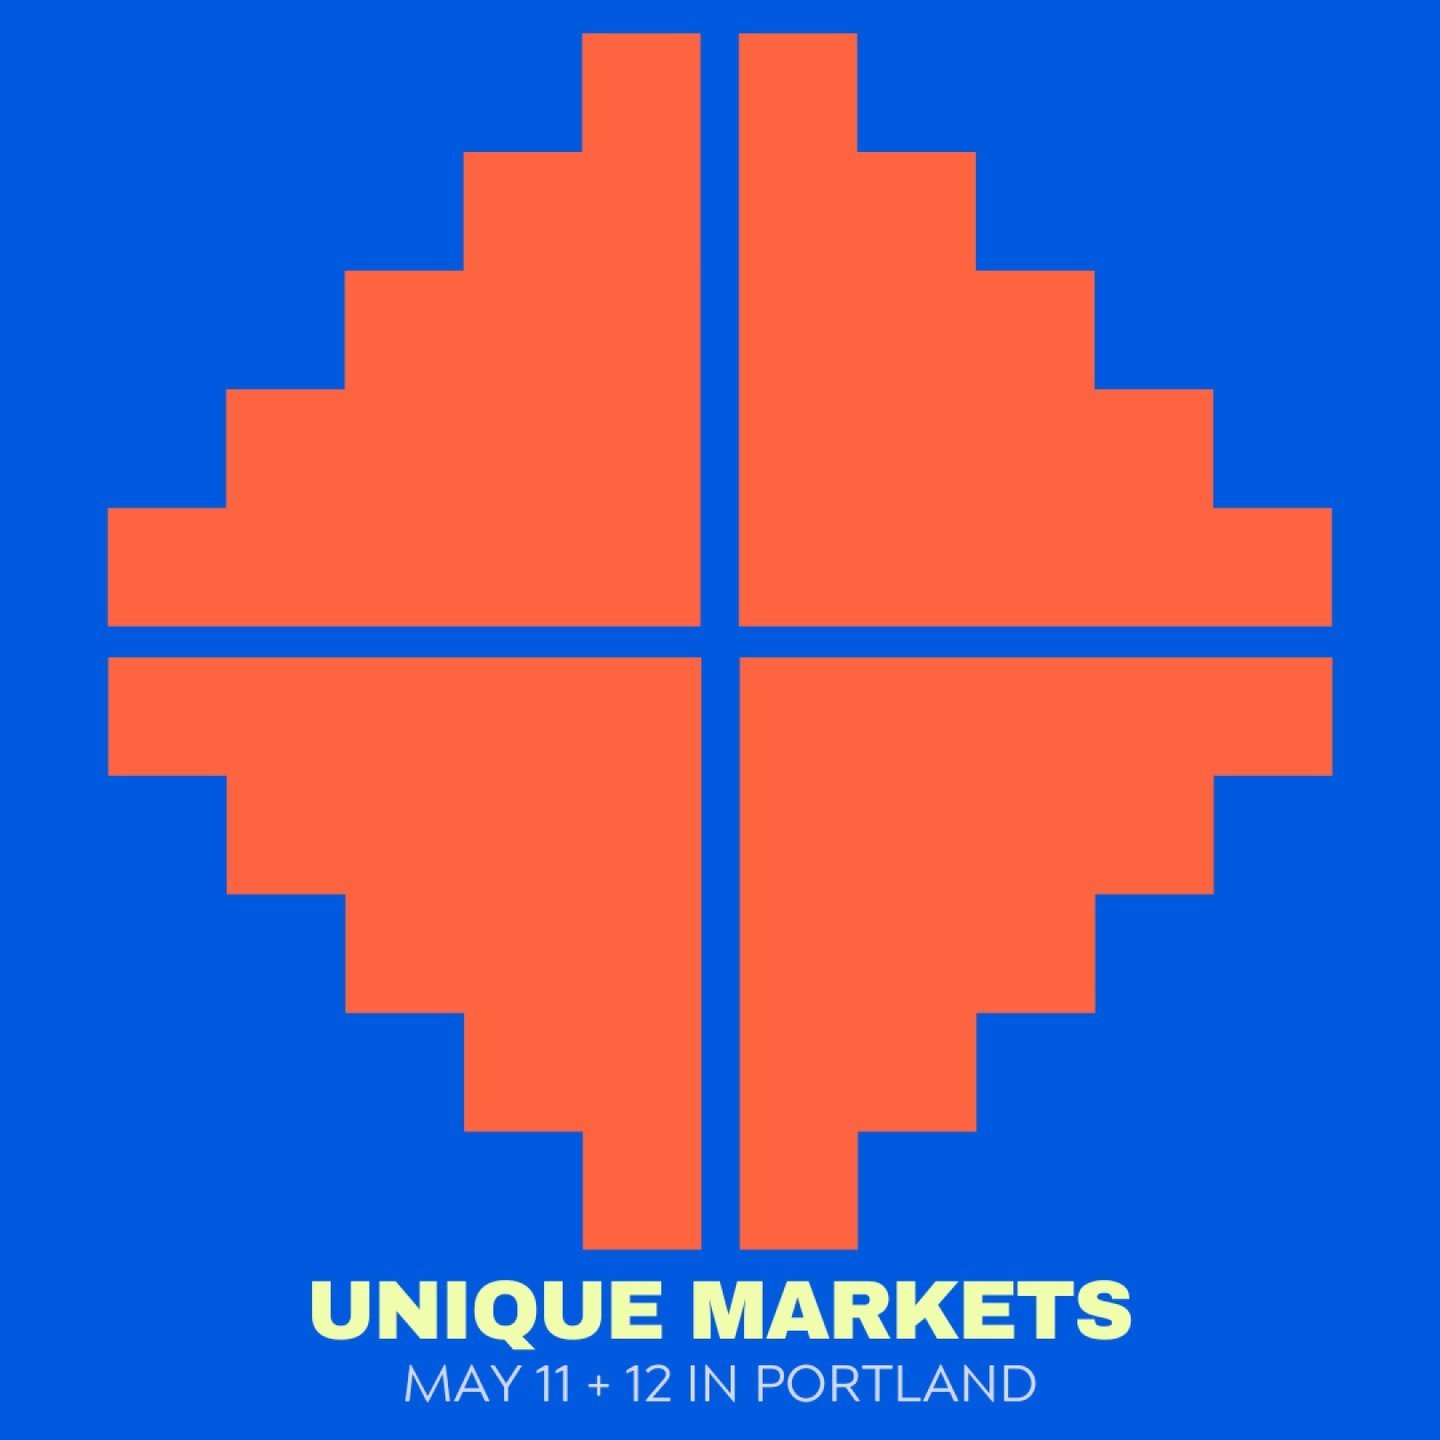 Unique Markets is happening in PDX this May 11+12! 🙌 This Woman-owned pop-up market aims to uplift independent designers and emerging brands, support the local economy, and spread awareness about conscious consumerism. 🌎🛍🤝Come shop and support th